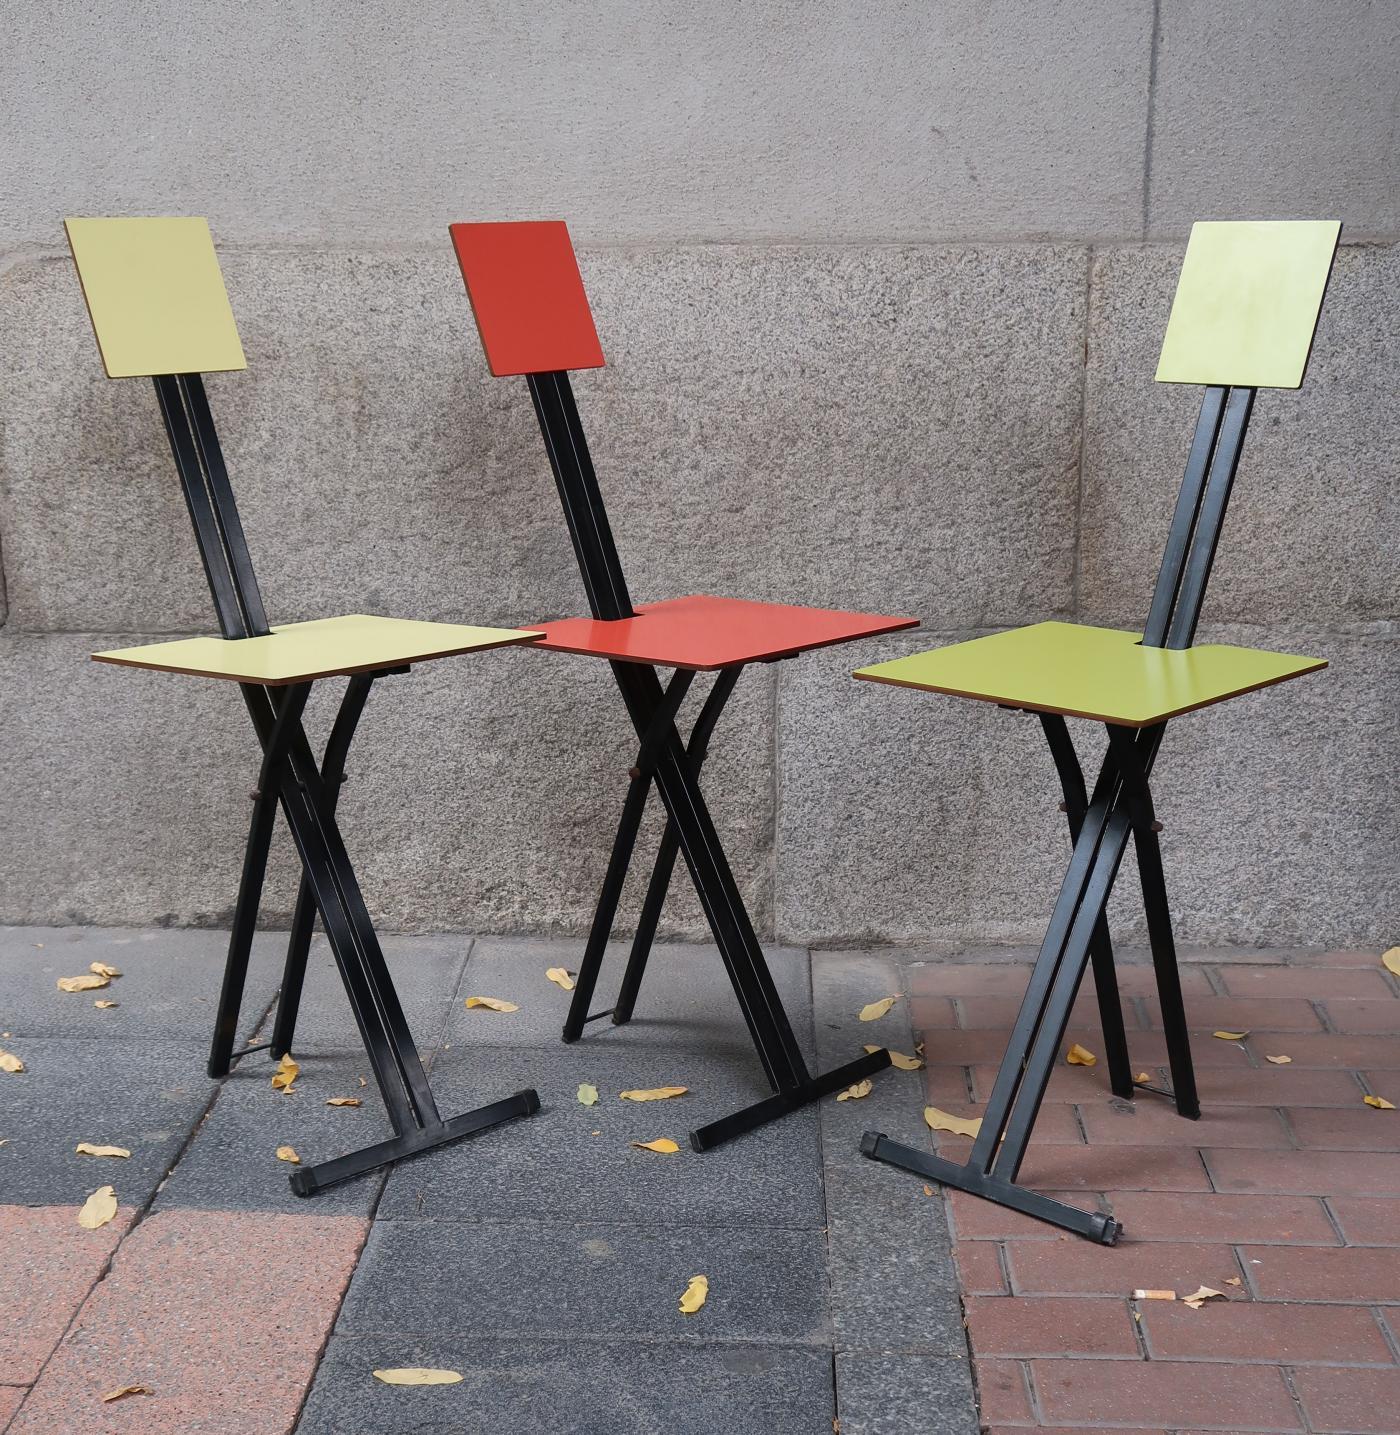 Lacquered 3 Metal & Red, Yellow & Green Folding Midcentury Chairs by Formanova, 1960 For Sale